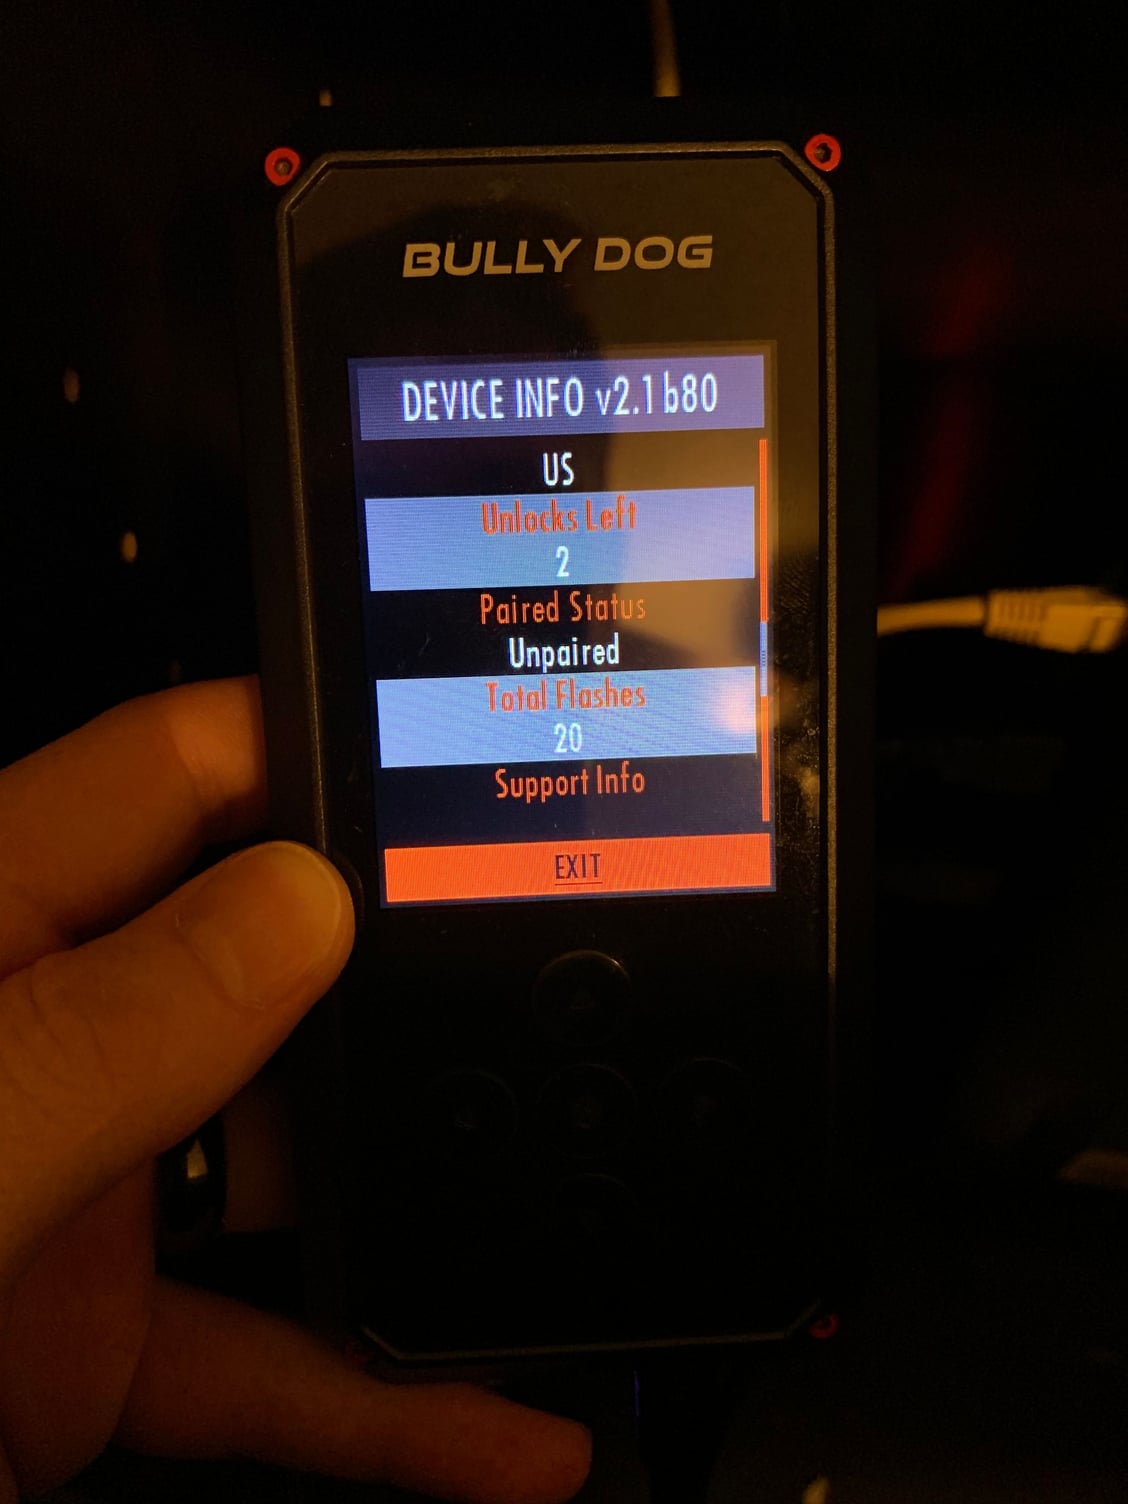 bullydog tuner will not recognize vehicle after update